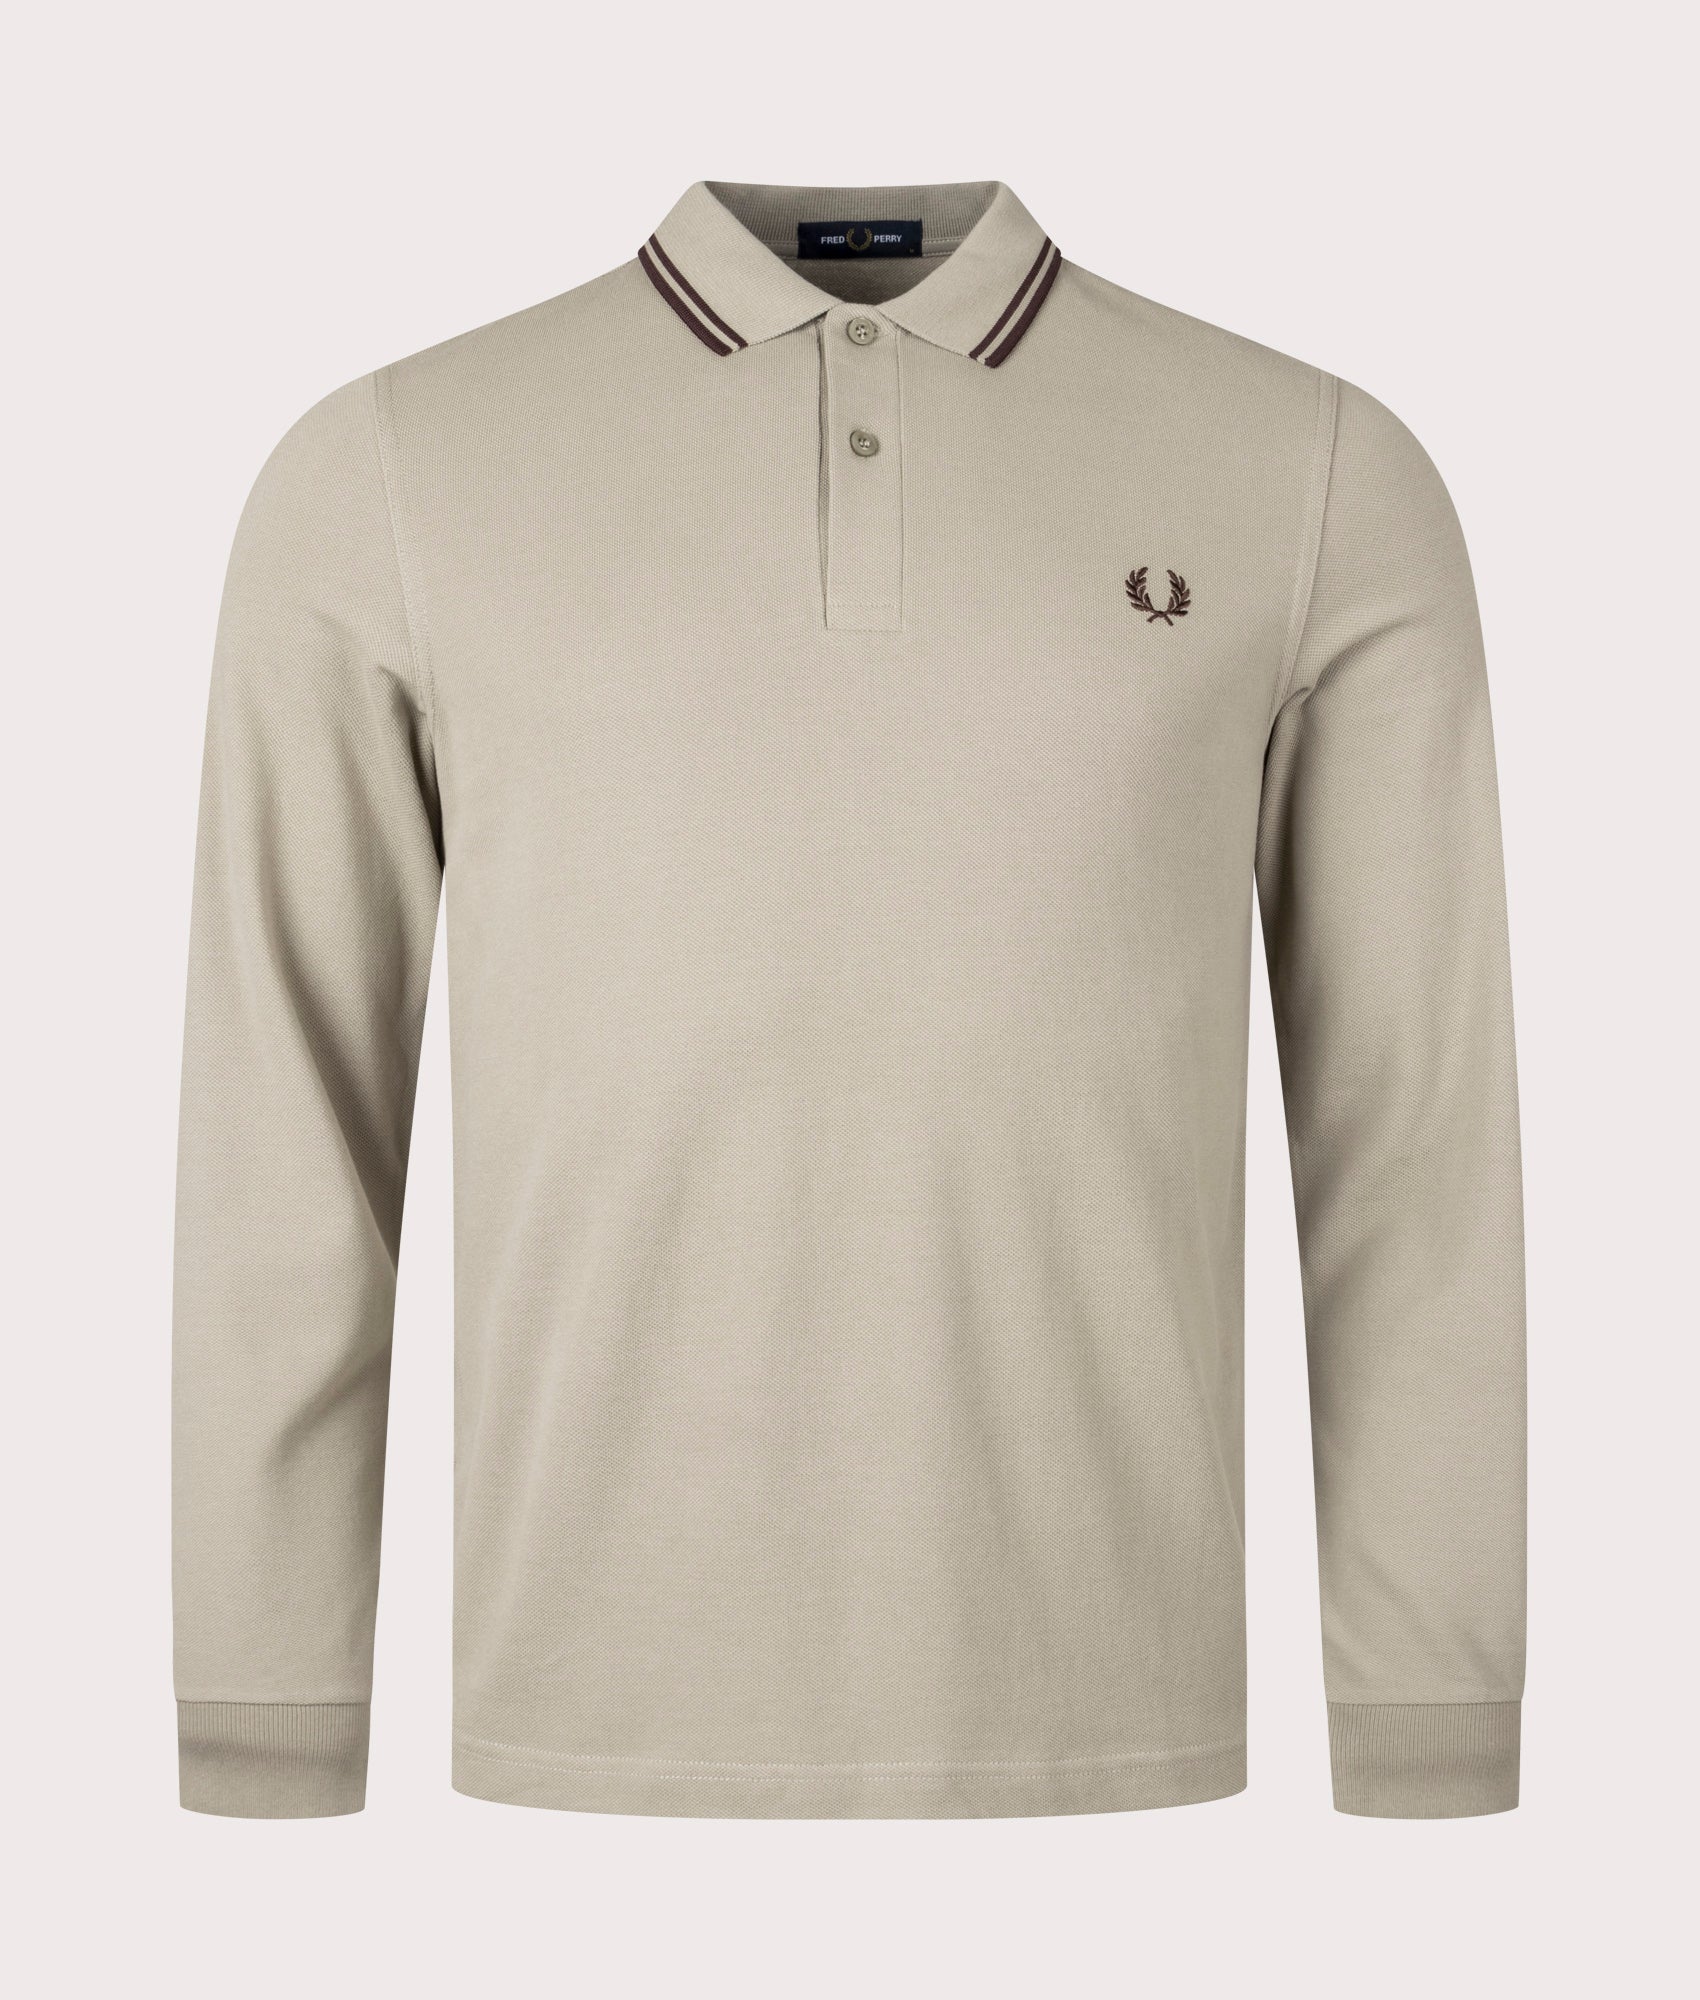 Fred Perry Mens Long Sleeve Twin Tipped Polo Shirt - Colour: U84 Warm Grey/Carrington Road Brick - S